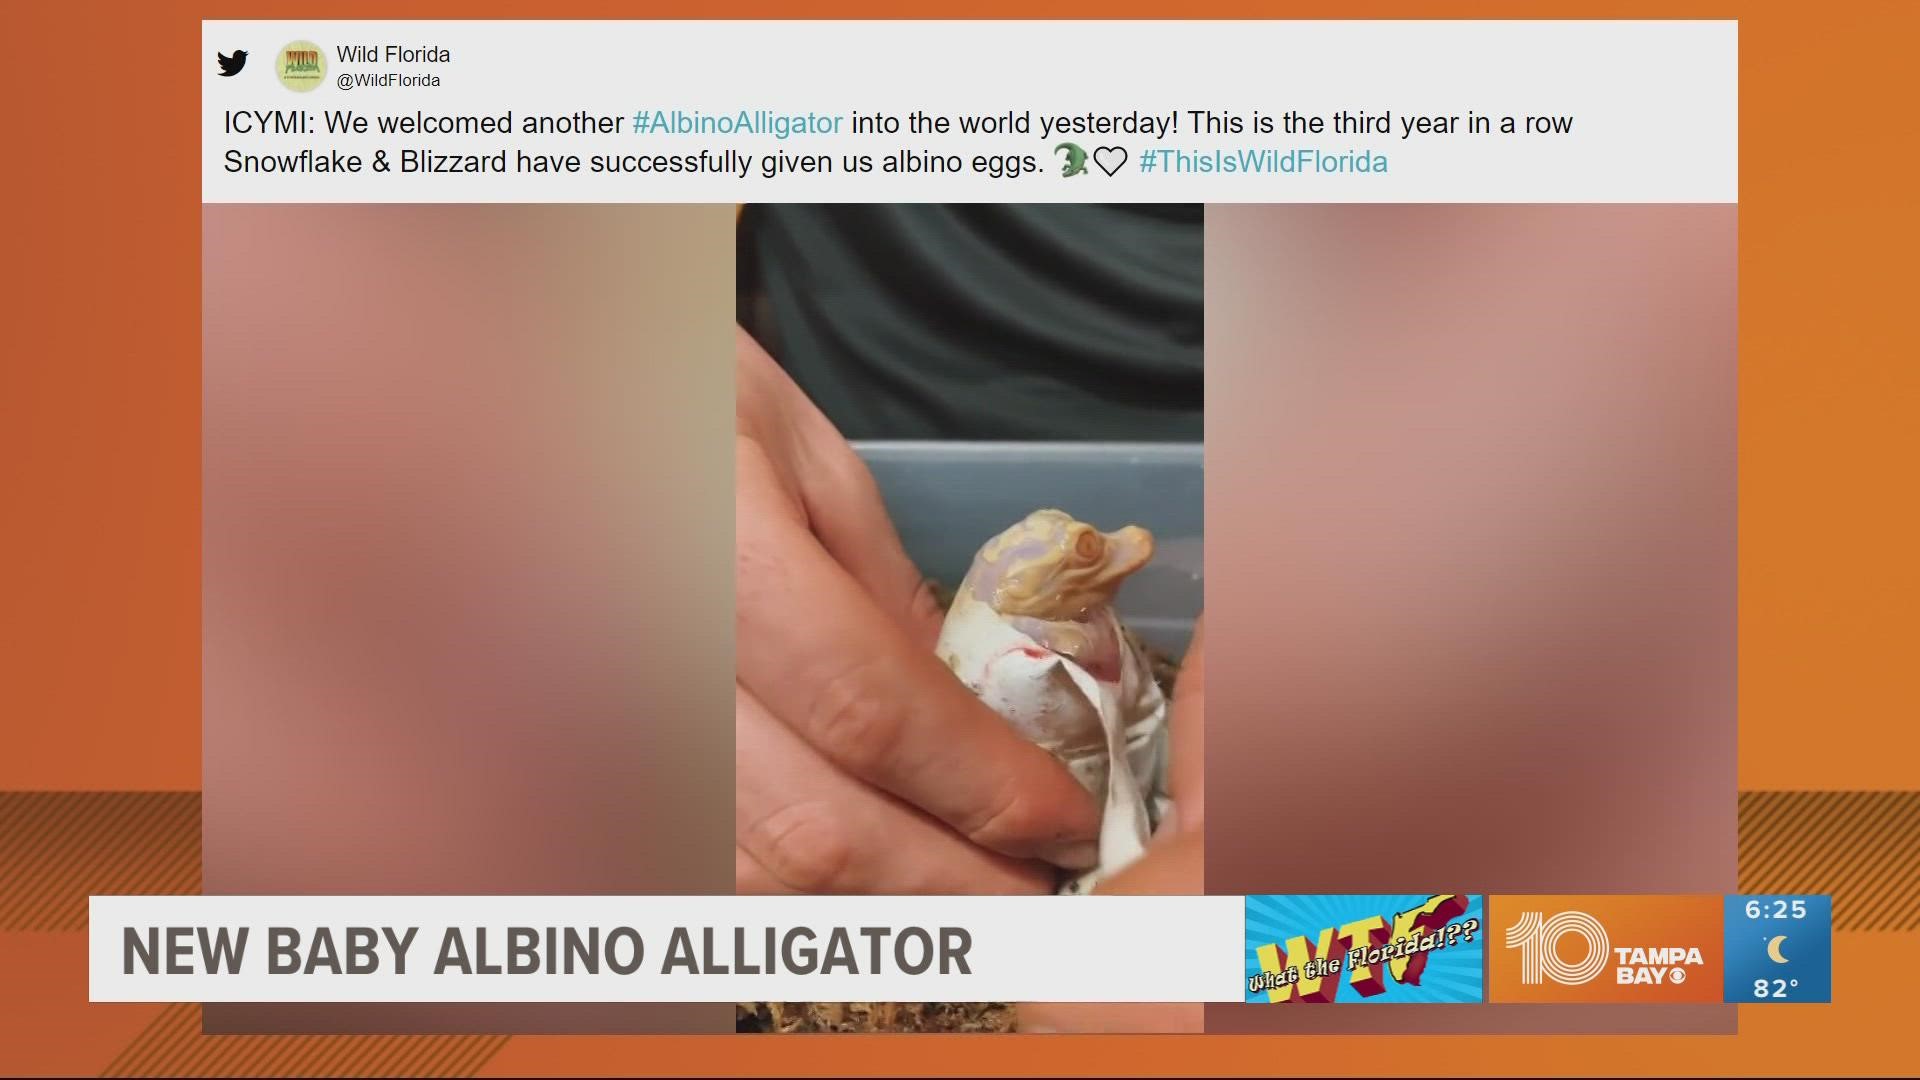 This is the third year in a row that albino baby gators have been born at Wild Florida.